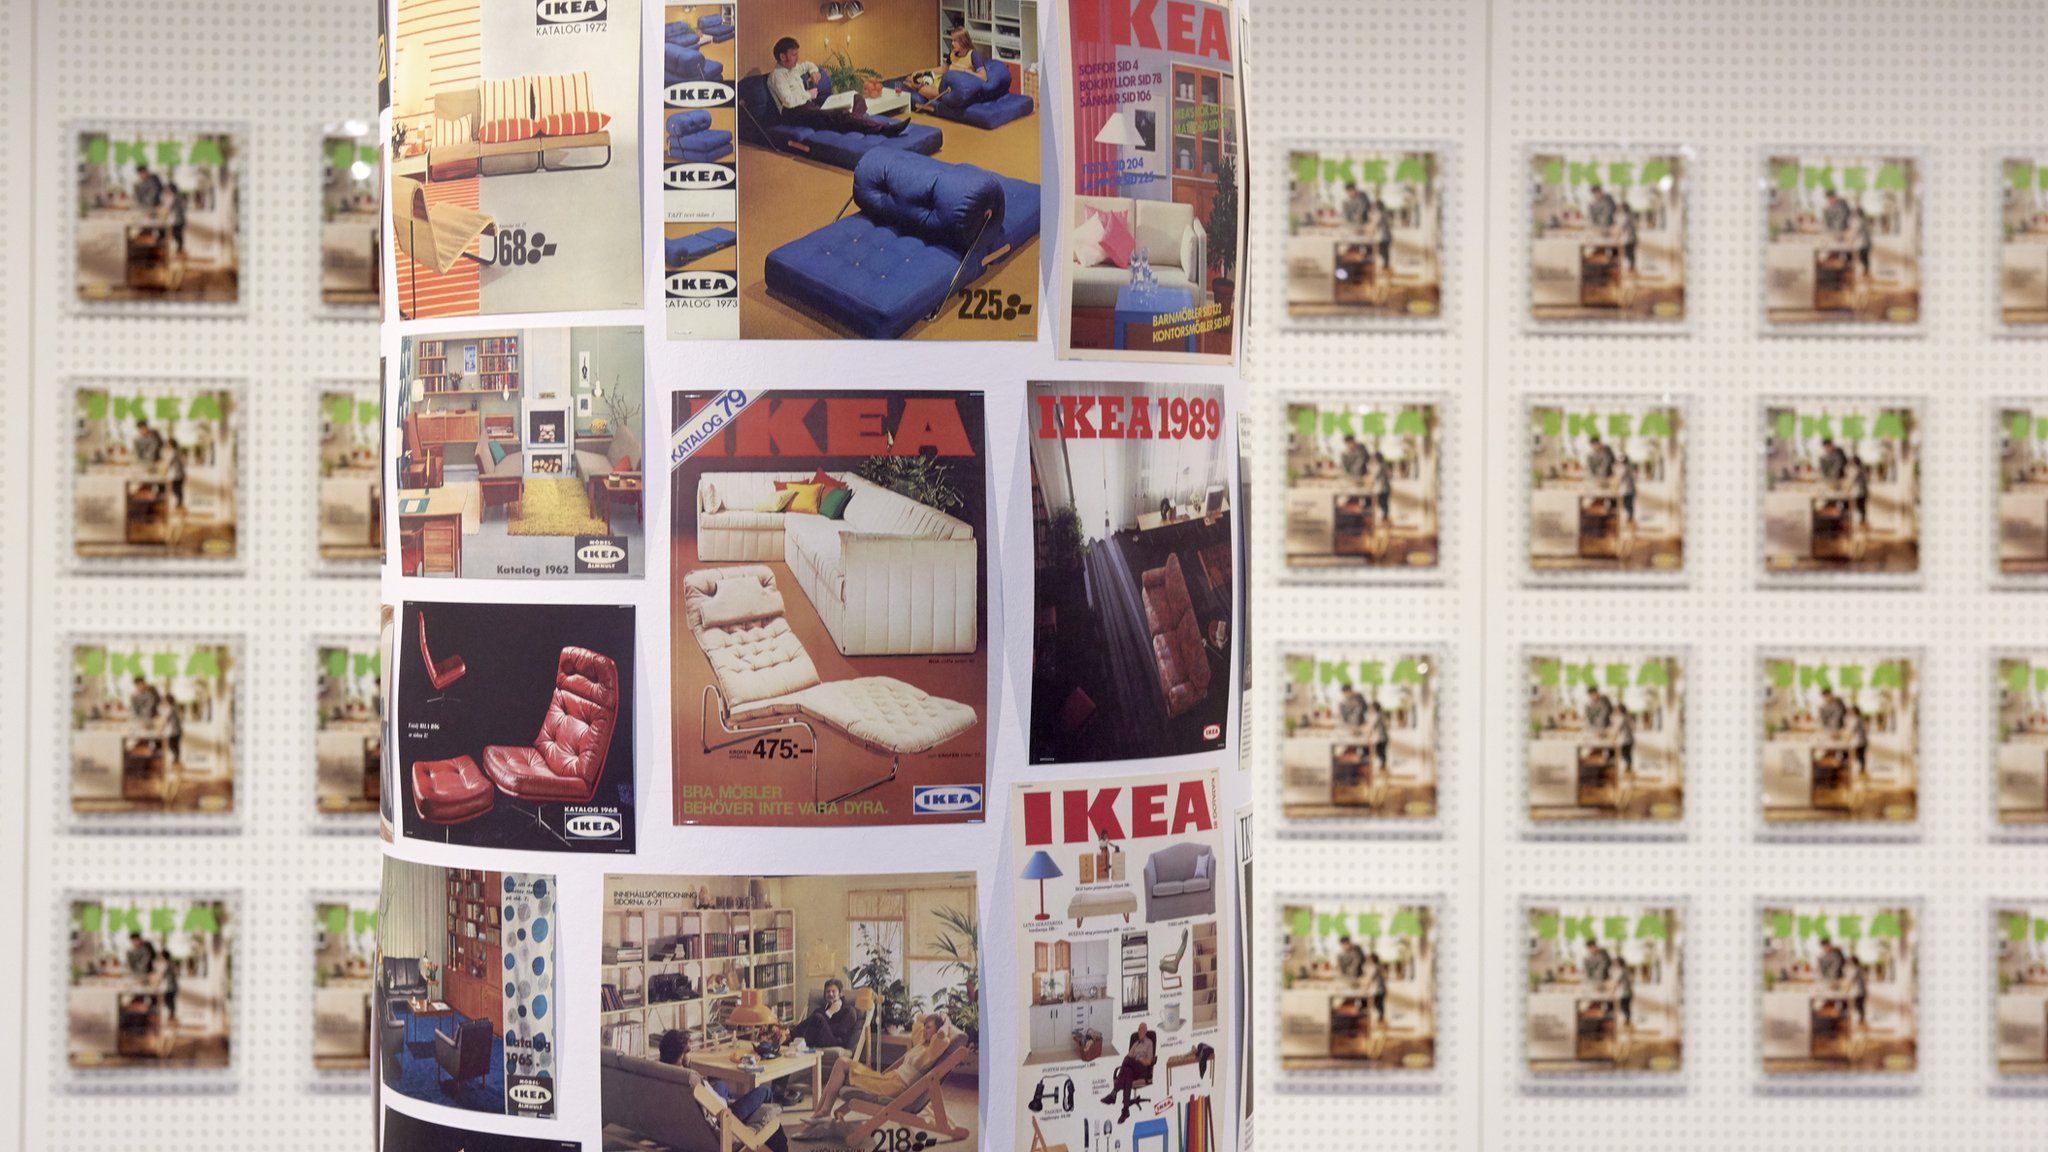 IKEA Catalogue covers through the ages